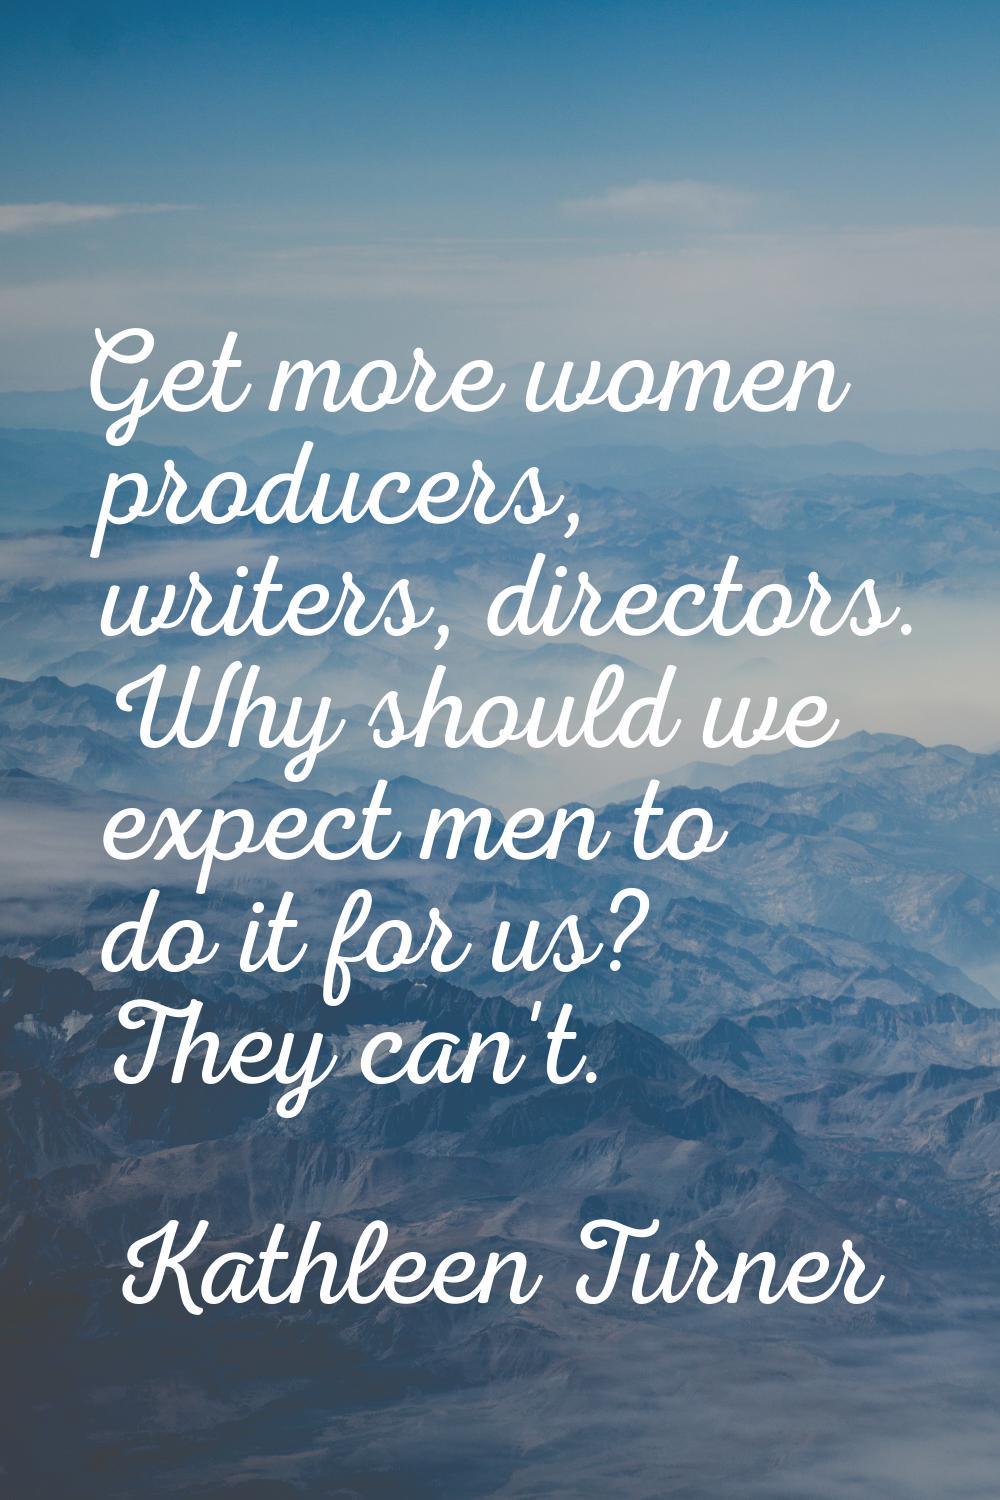 Get more women producers, writers, directors. Why should we expect men to do it for us? They can't.